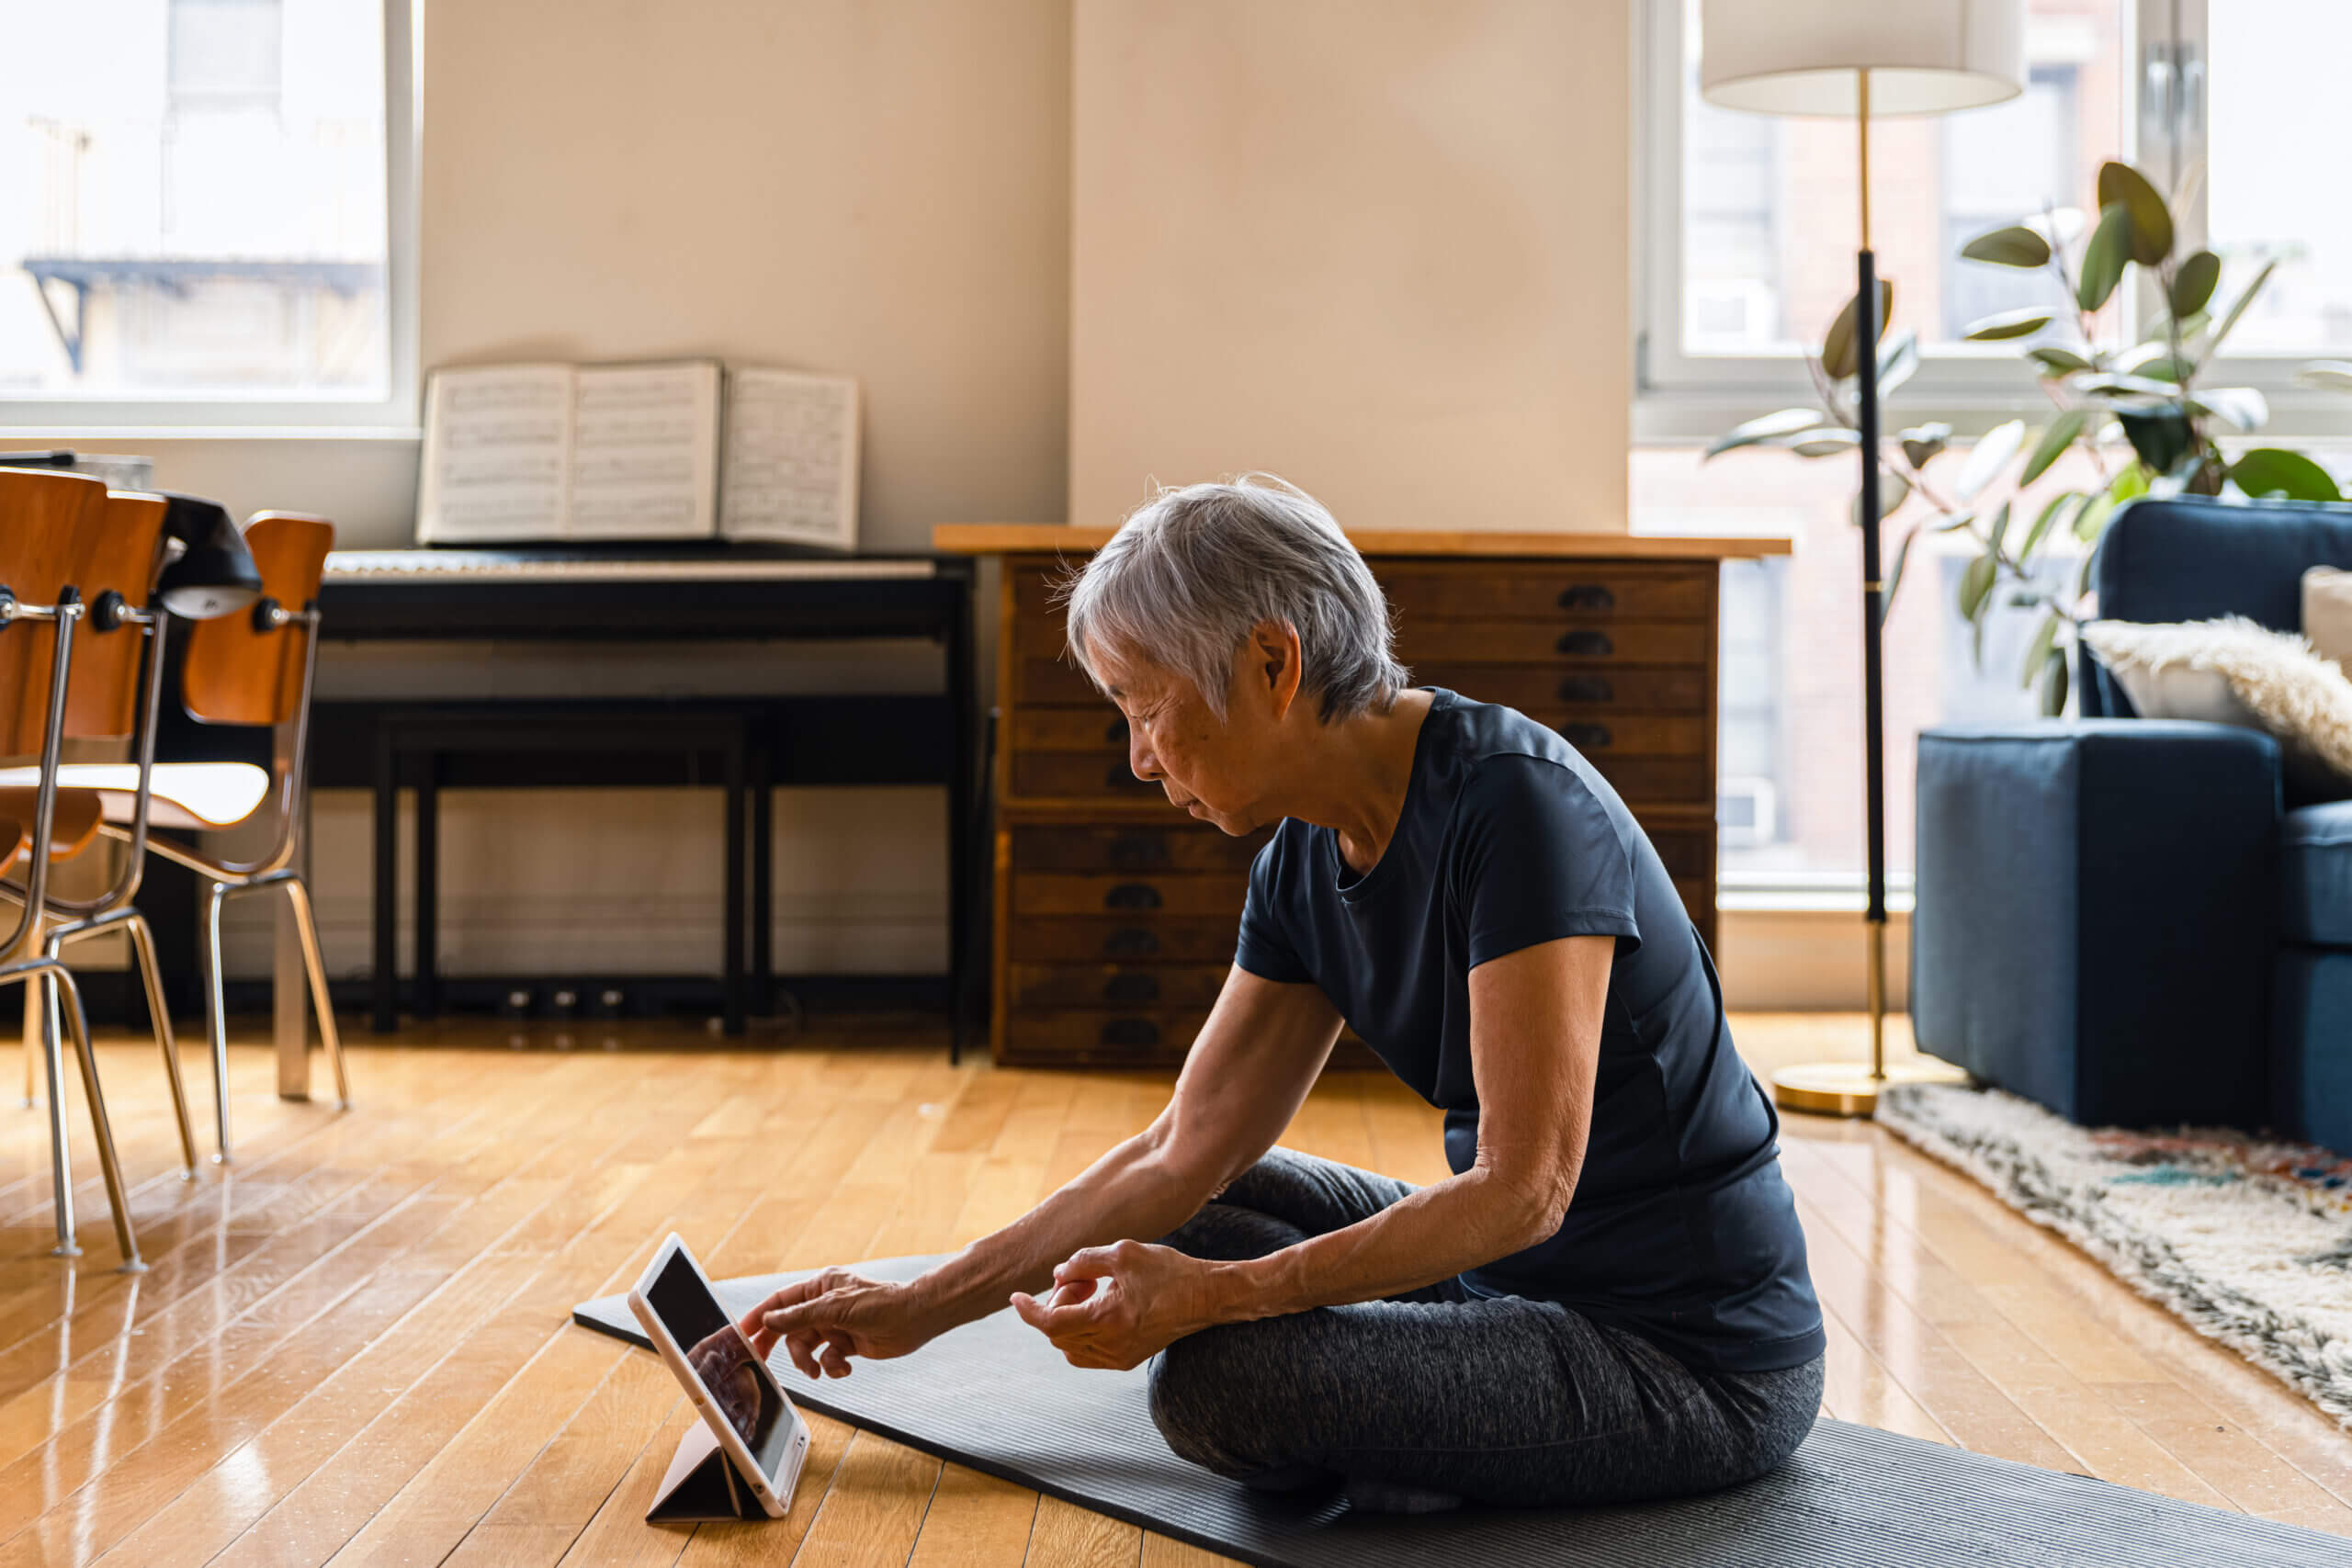 Older woman sitting on yoga mat looking at a tablet.